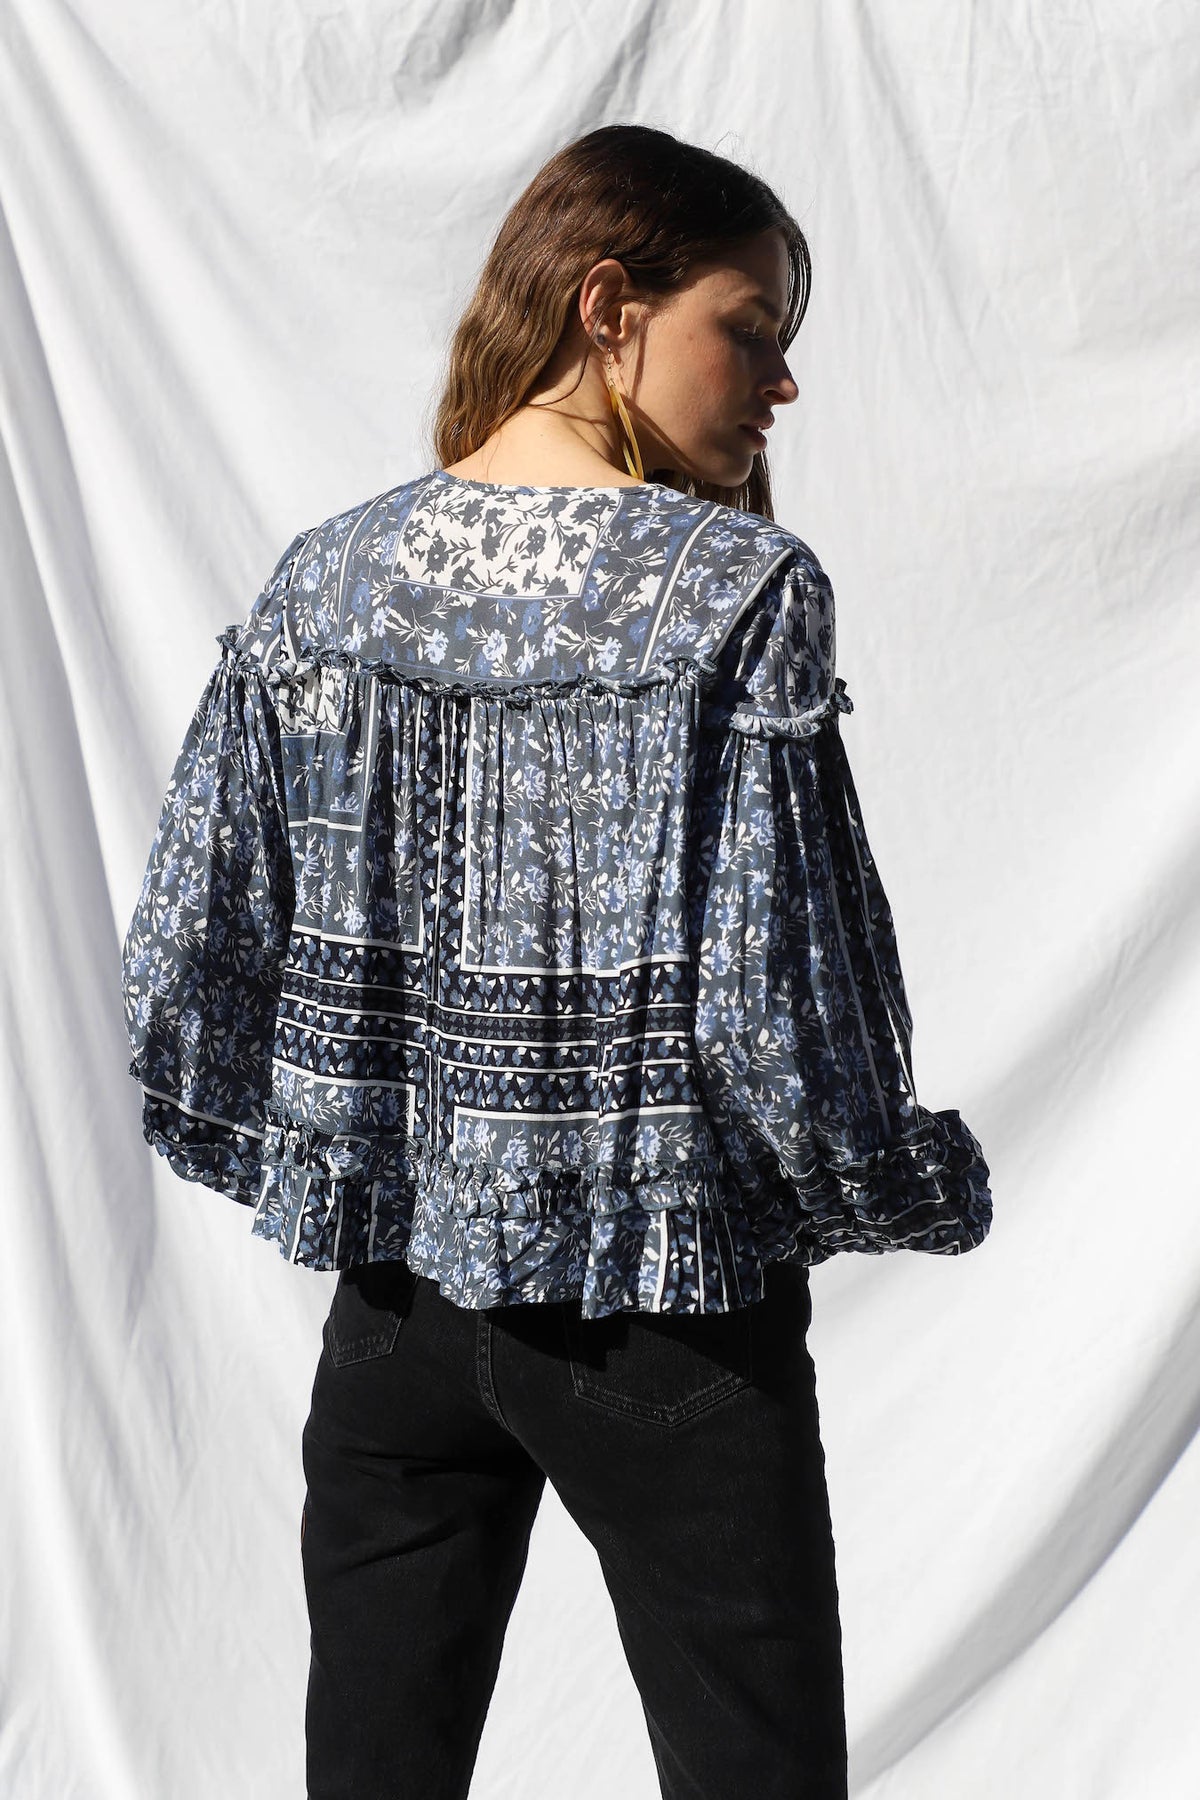 Roma Chariot Top